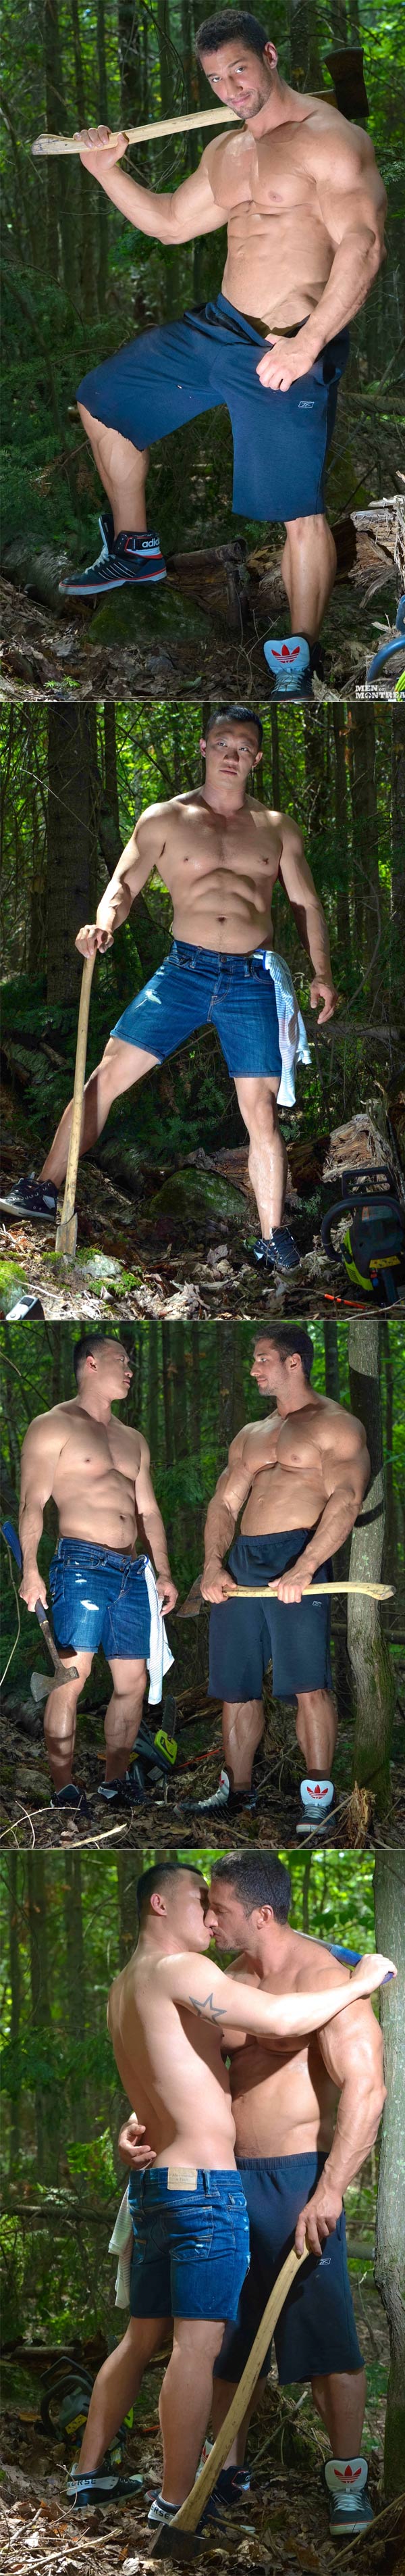 Gagging on The Lumberjack (Archer Quan & Christian Power) at MenOfMontreal